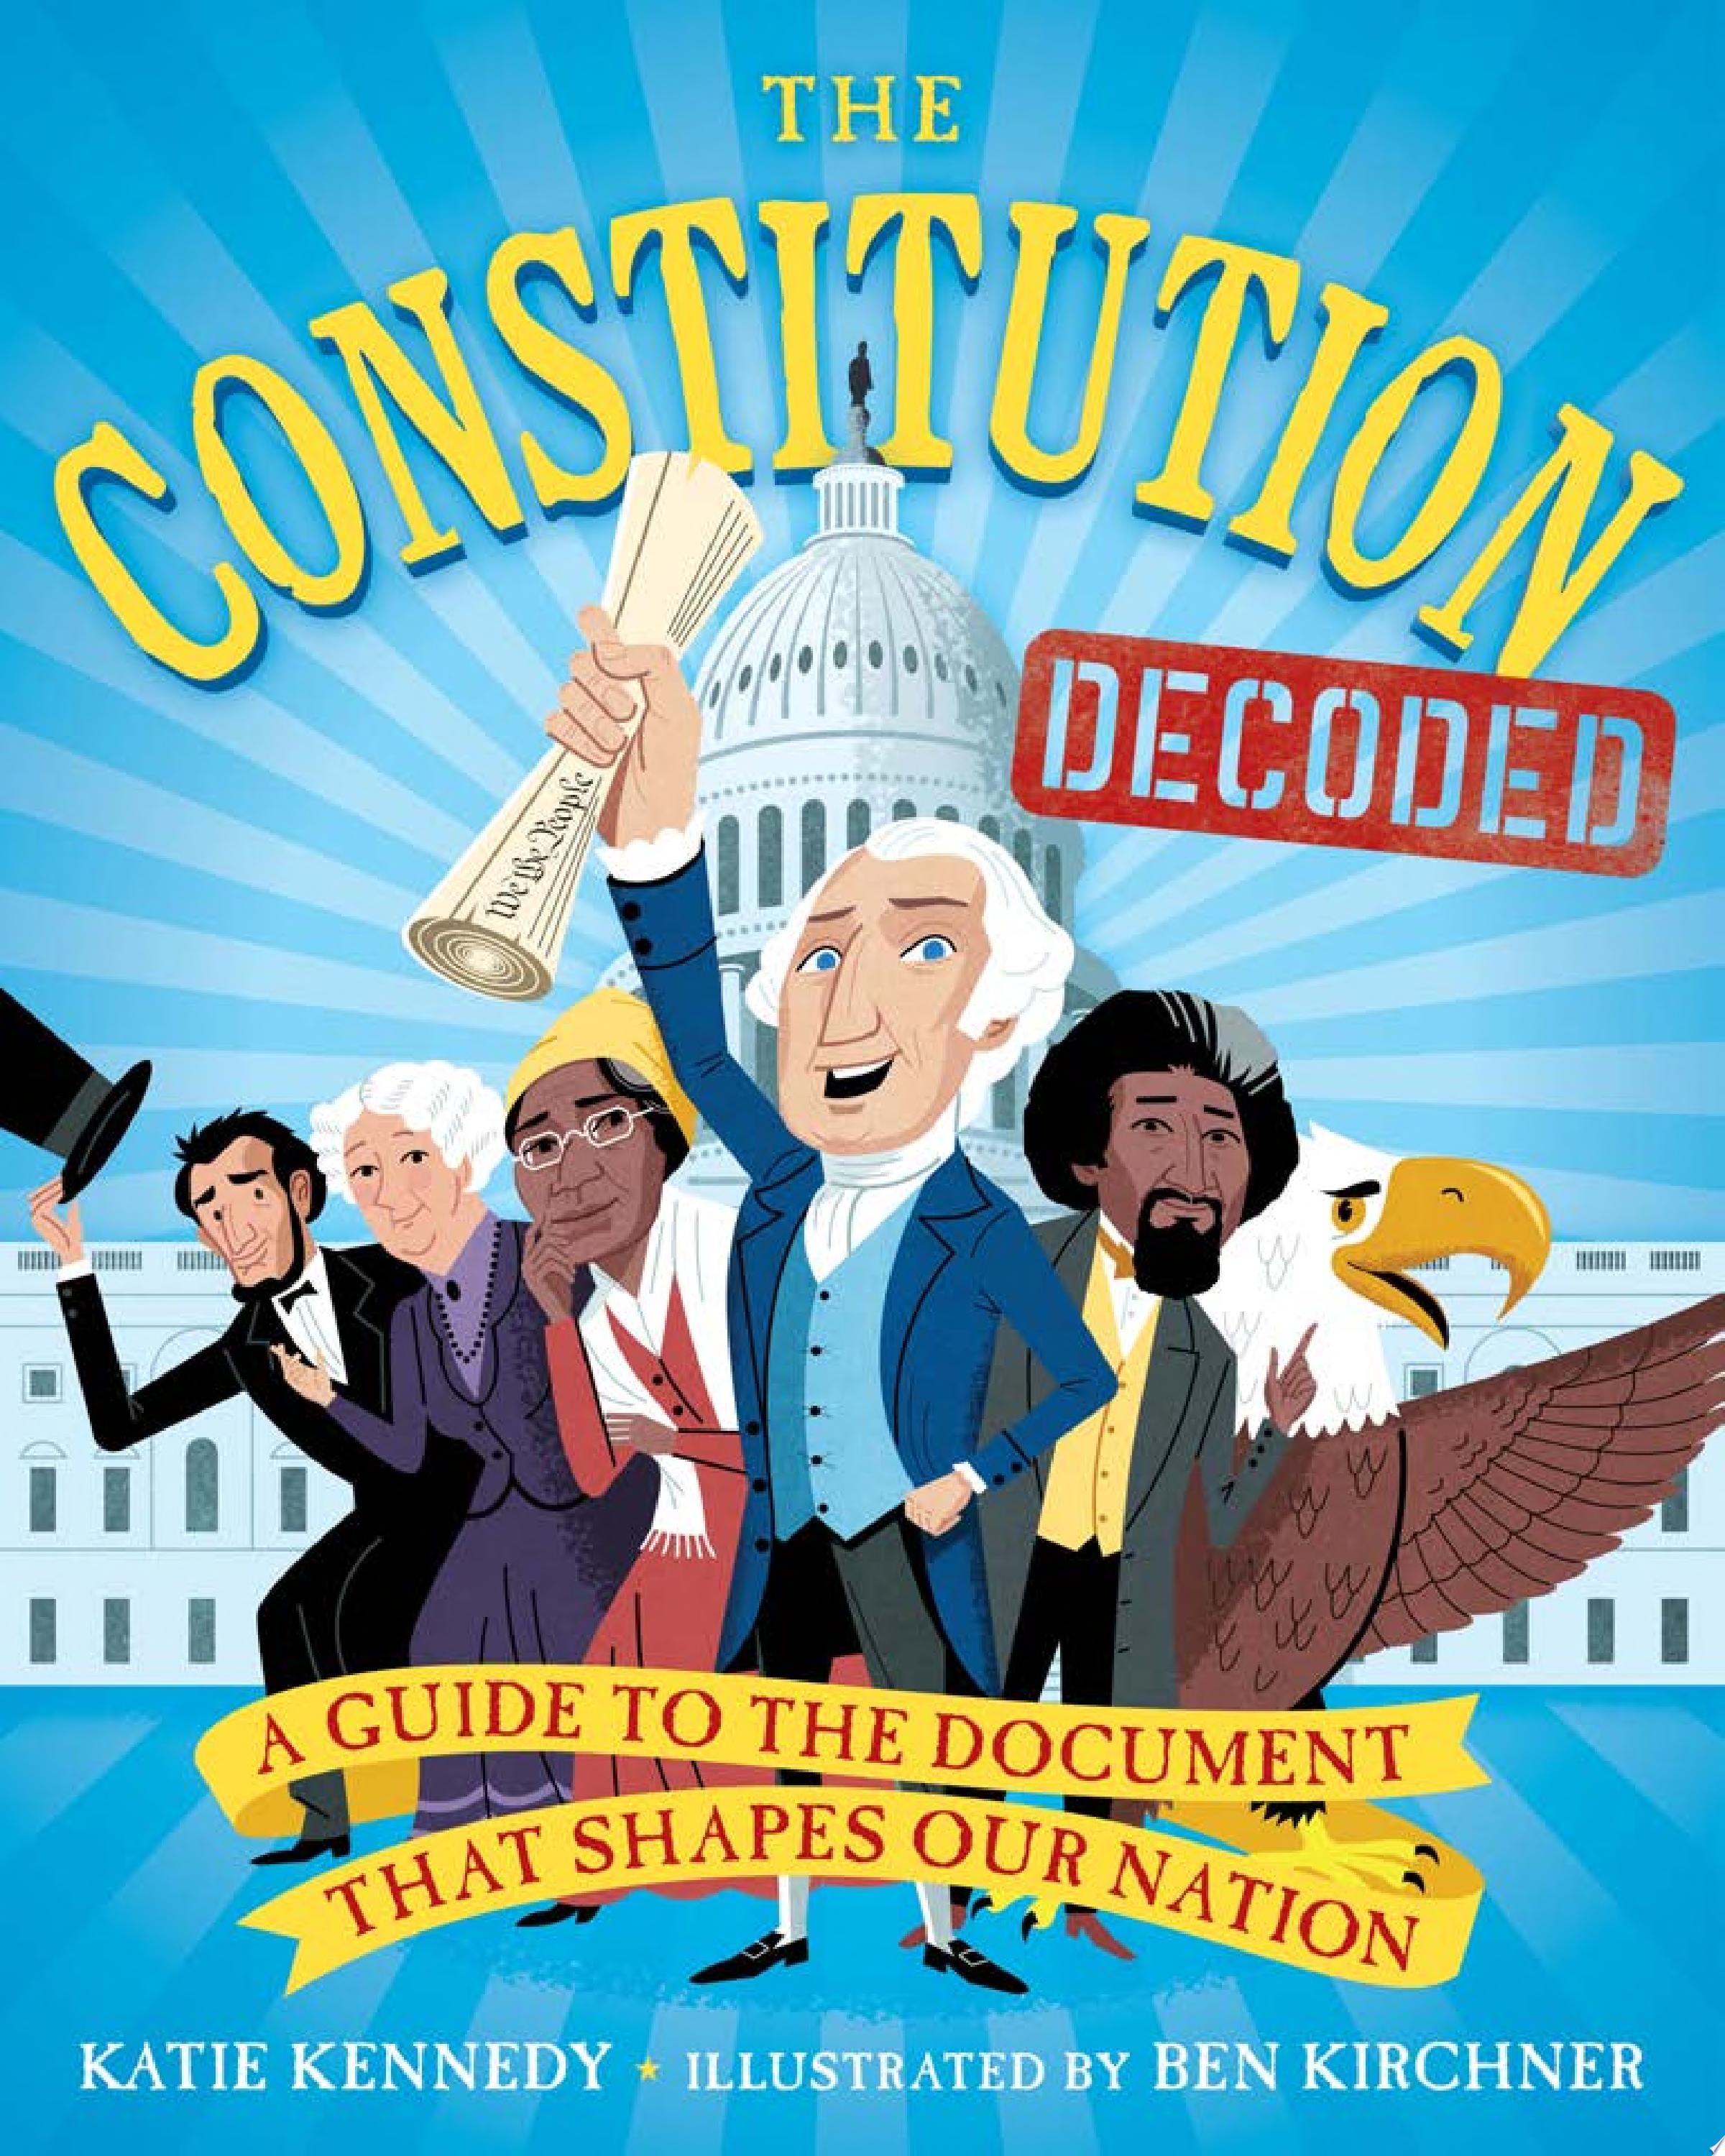 Image for "The Constitution Decoded"